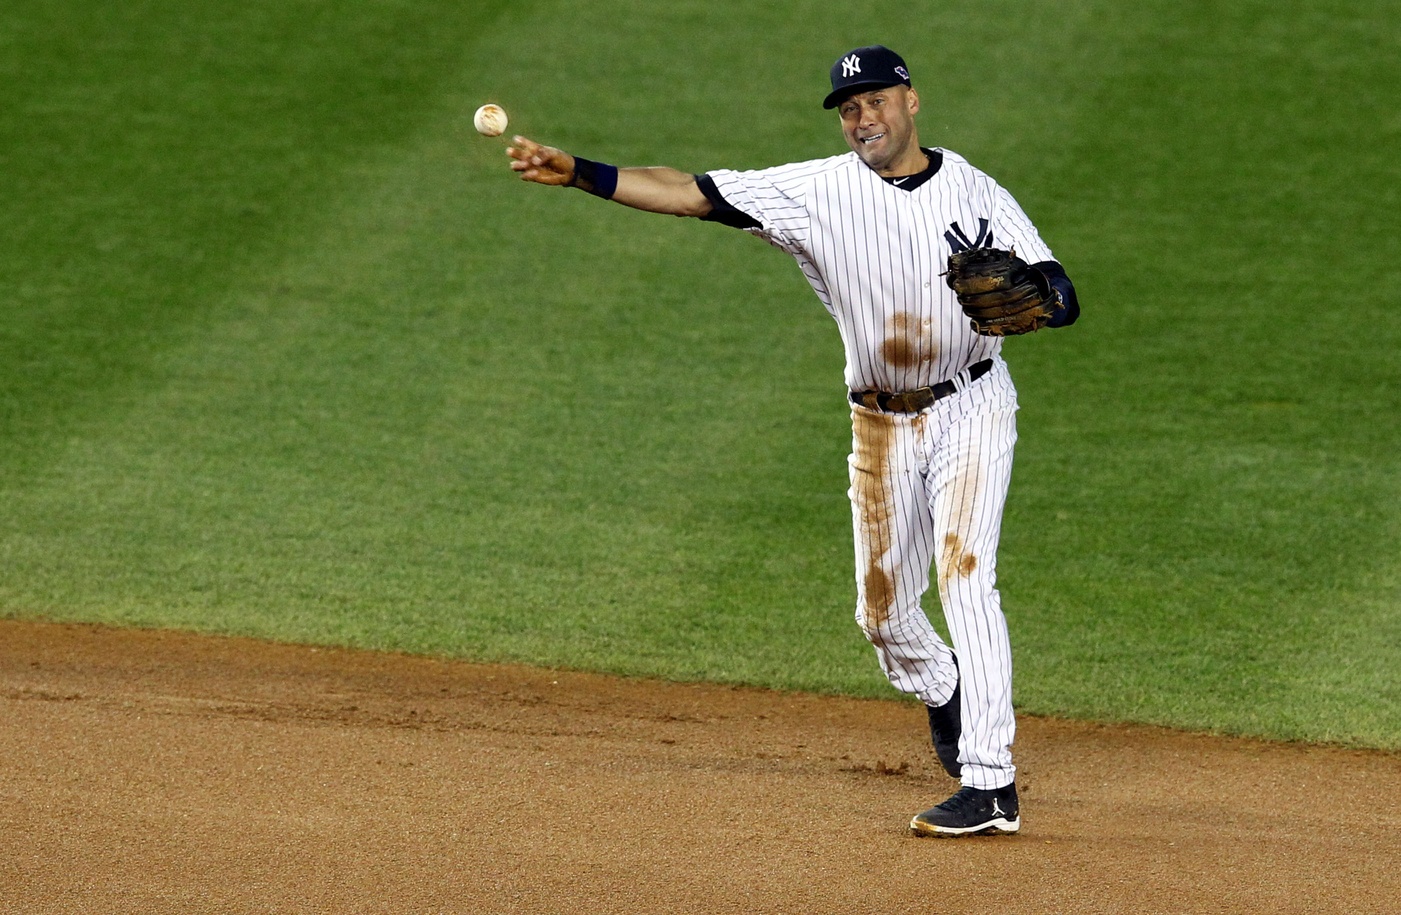 Jeter takes first batting practice since injury